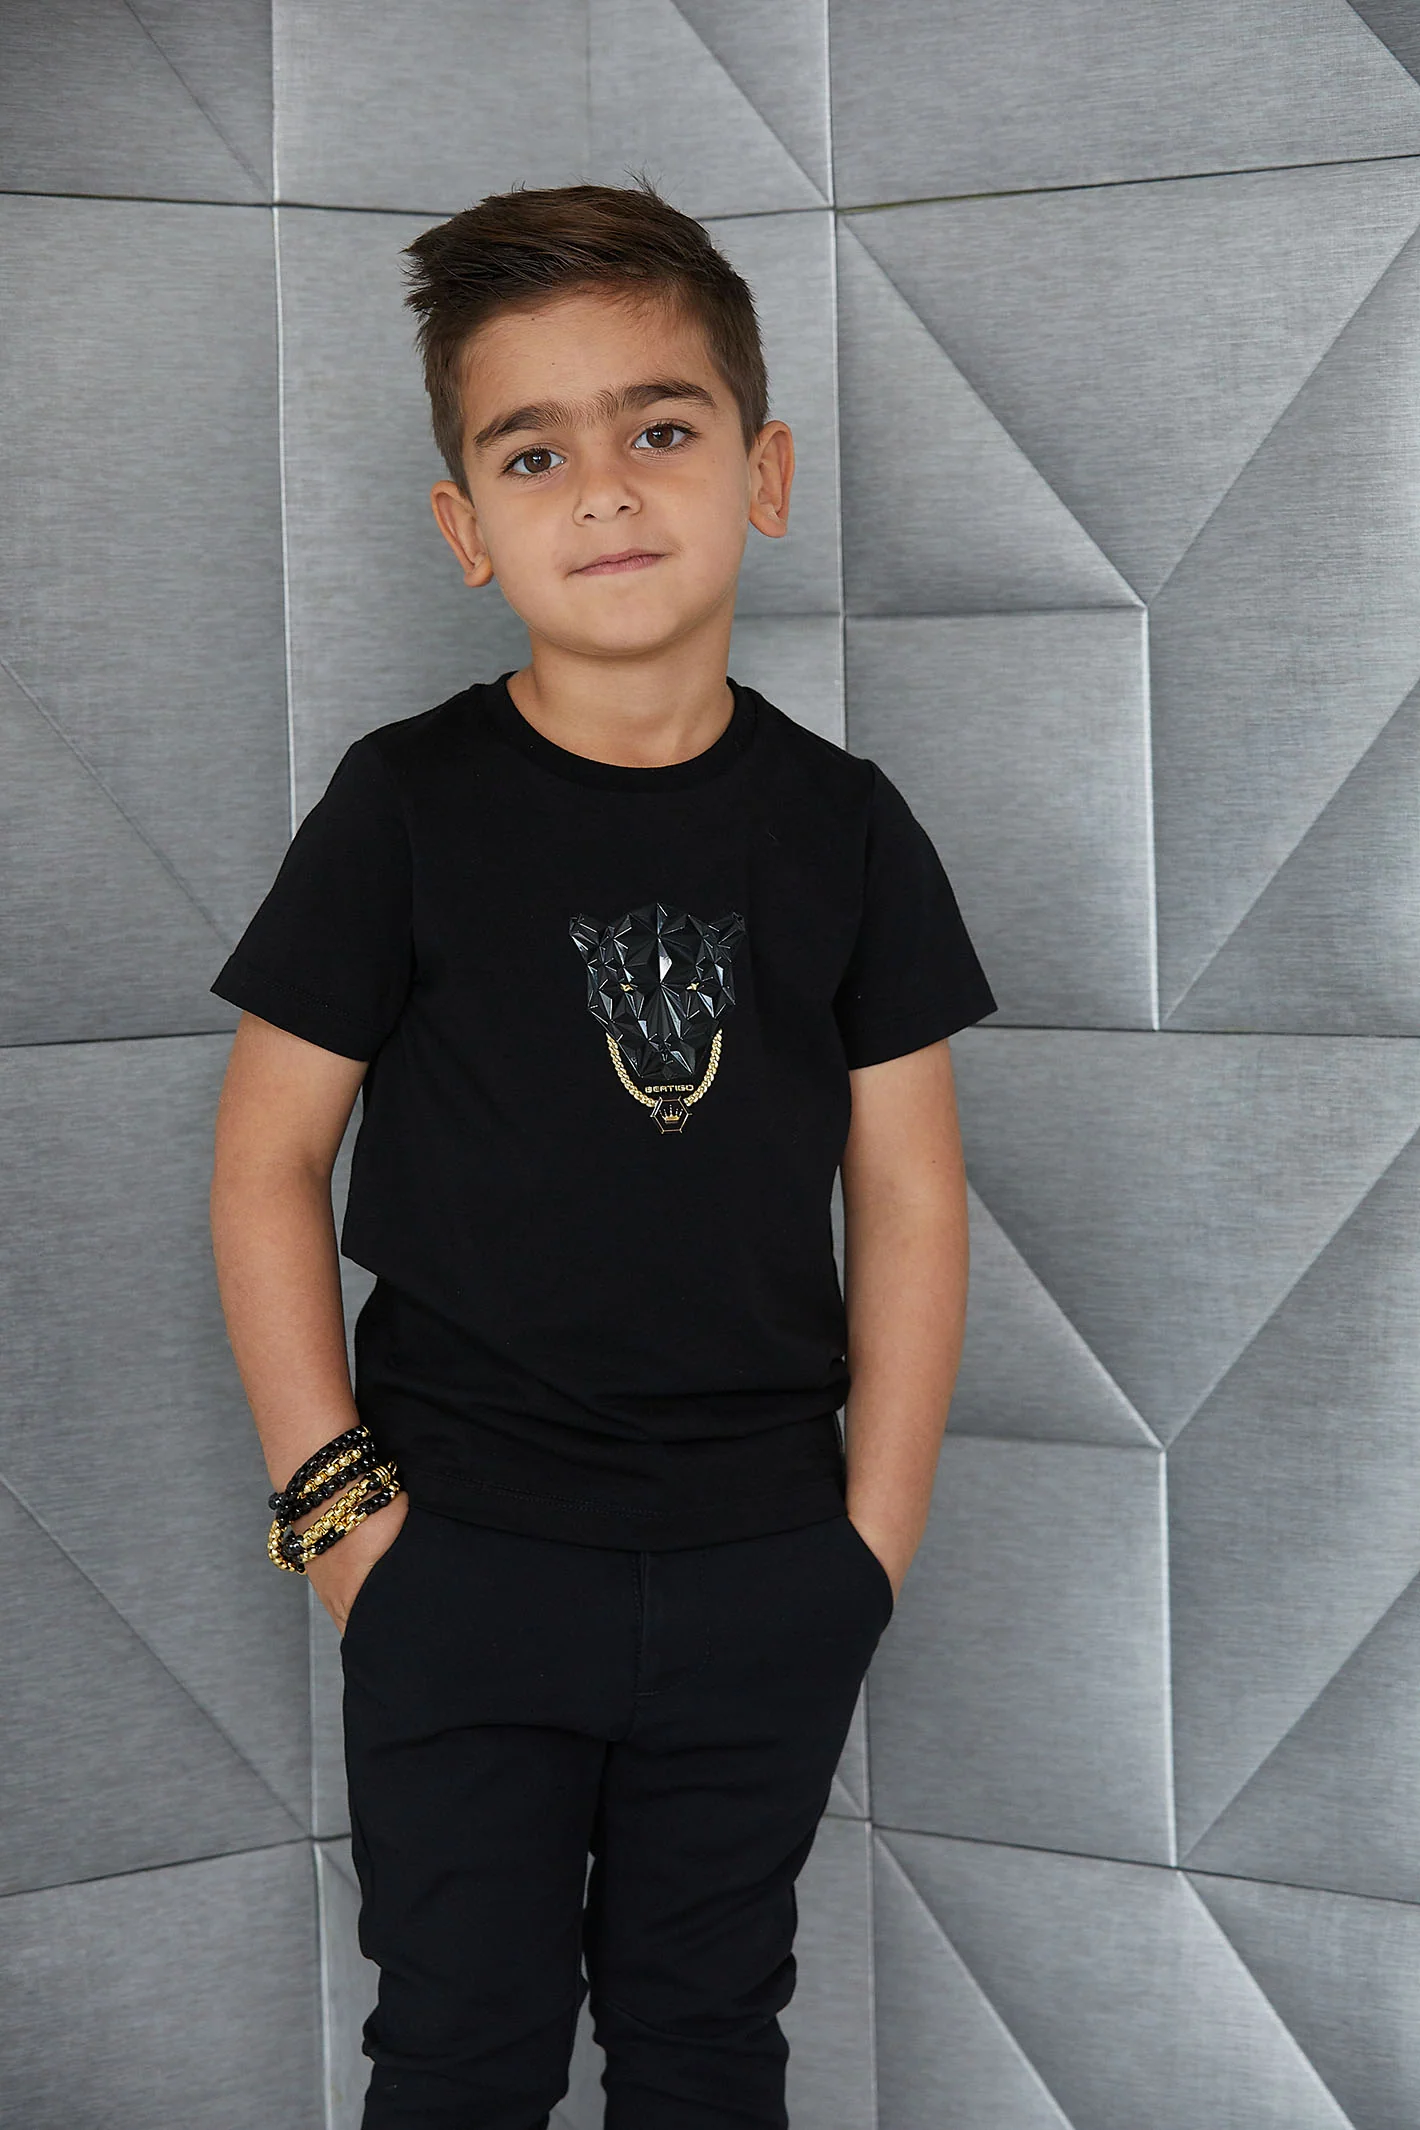 Effortlessly Stylish: Black Shirts Paired with Gold Chains